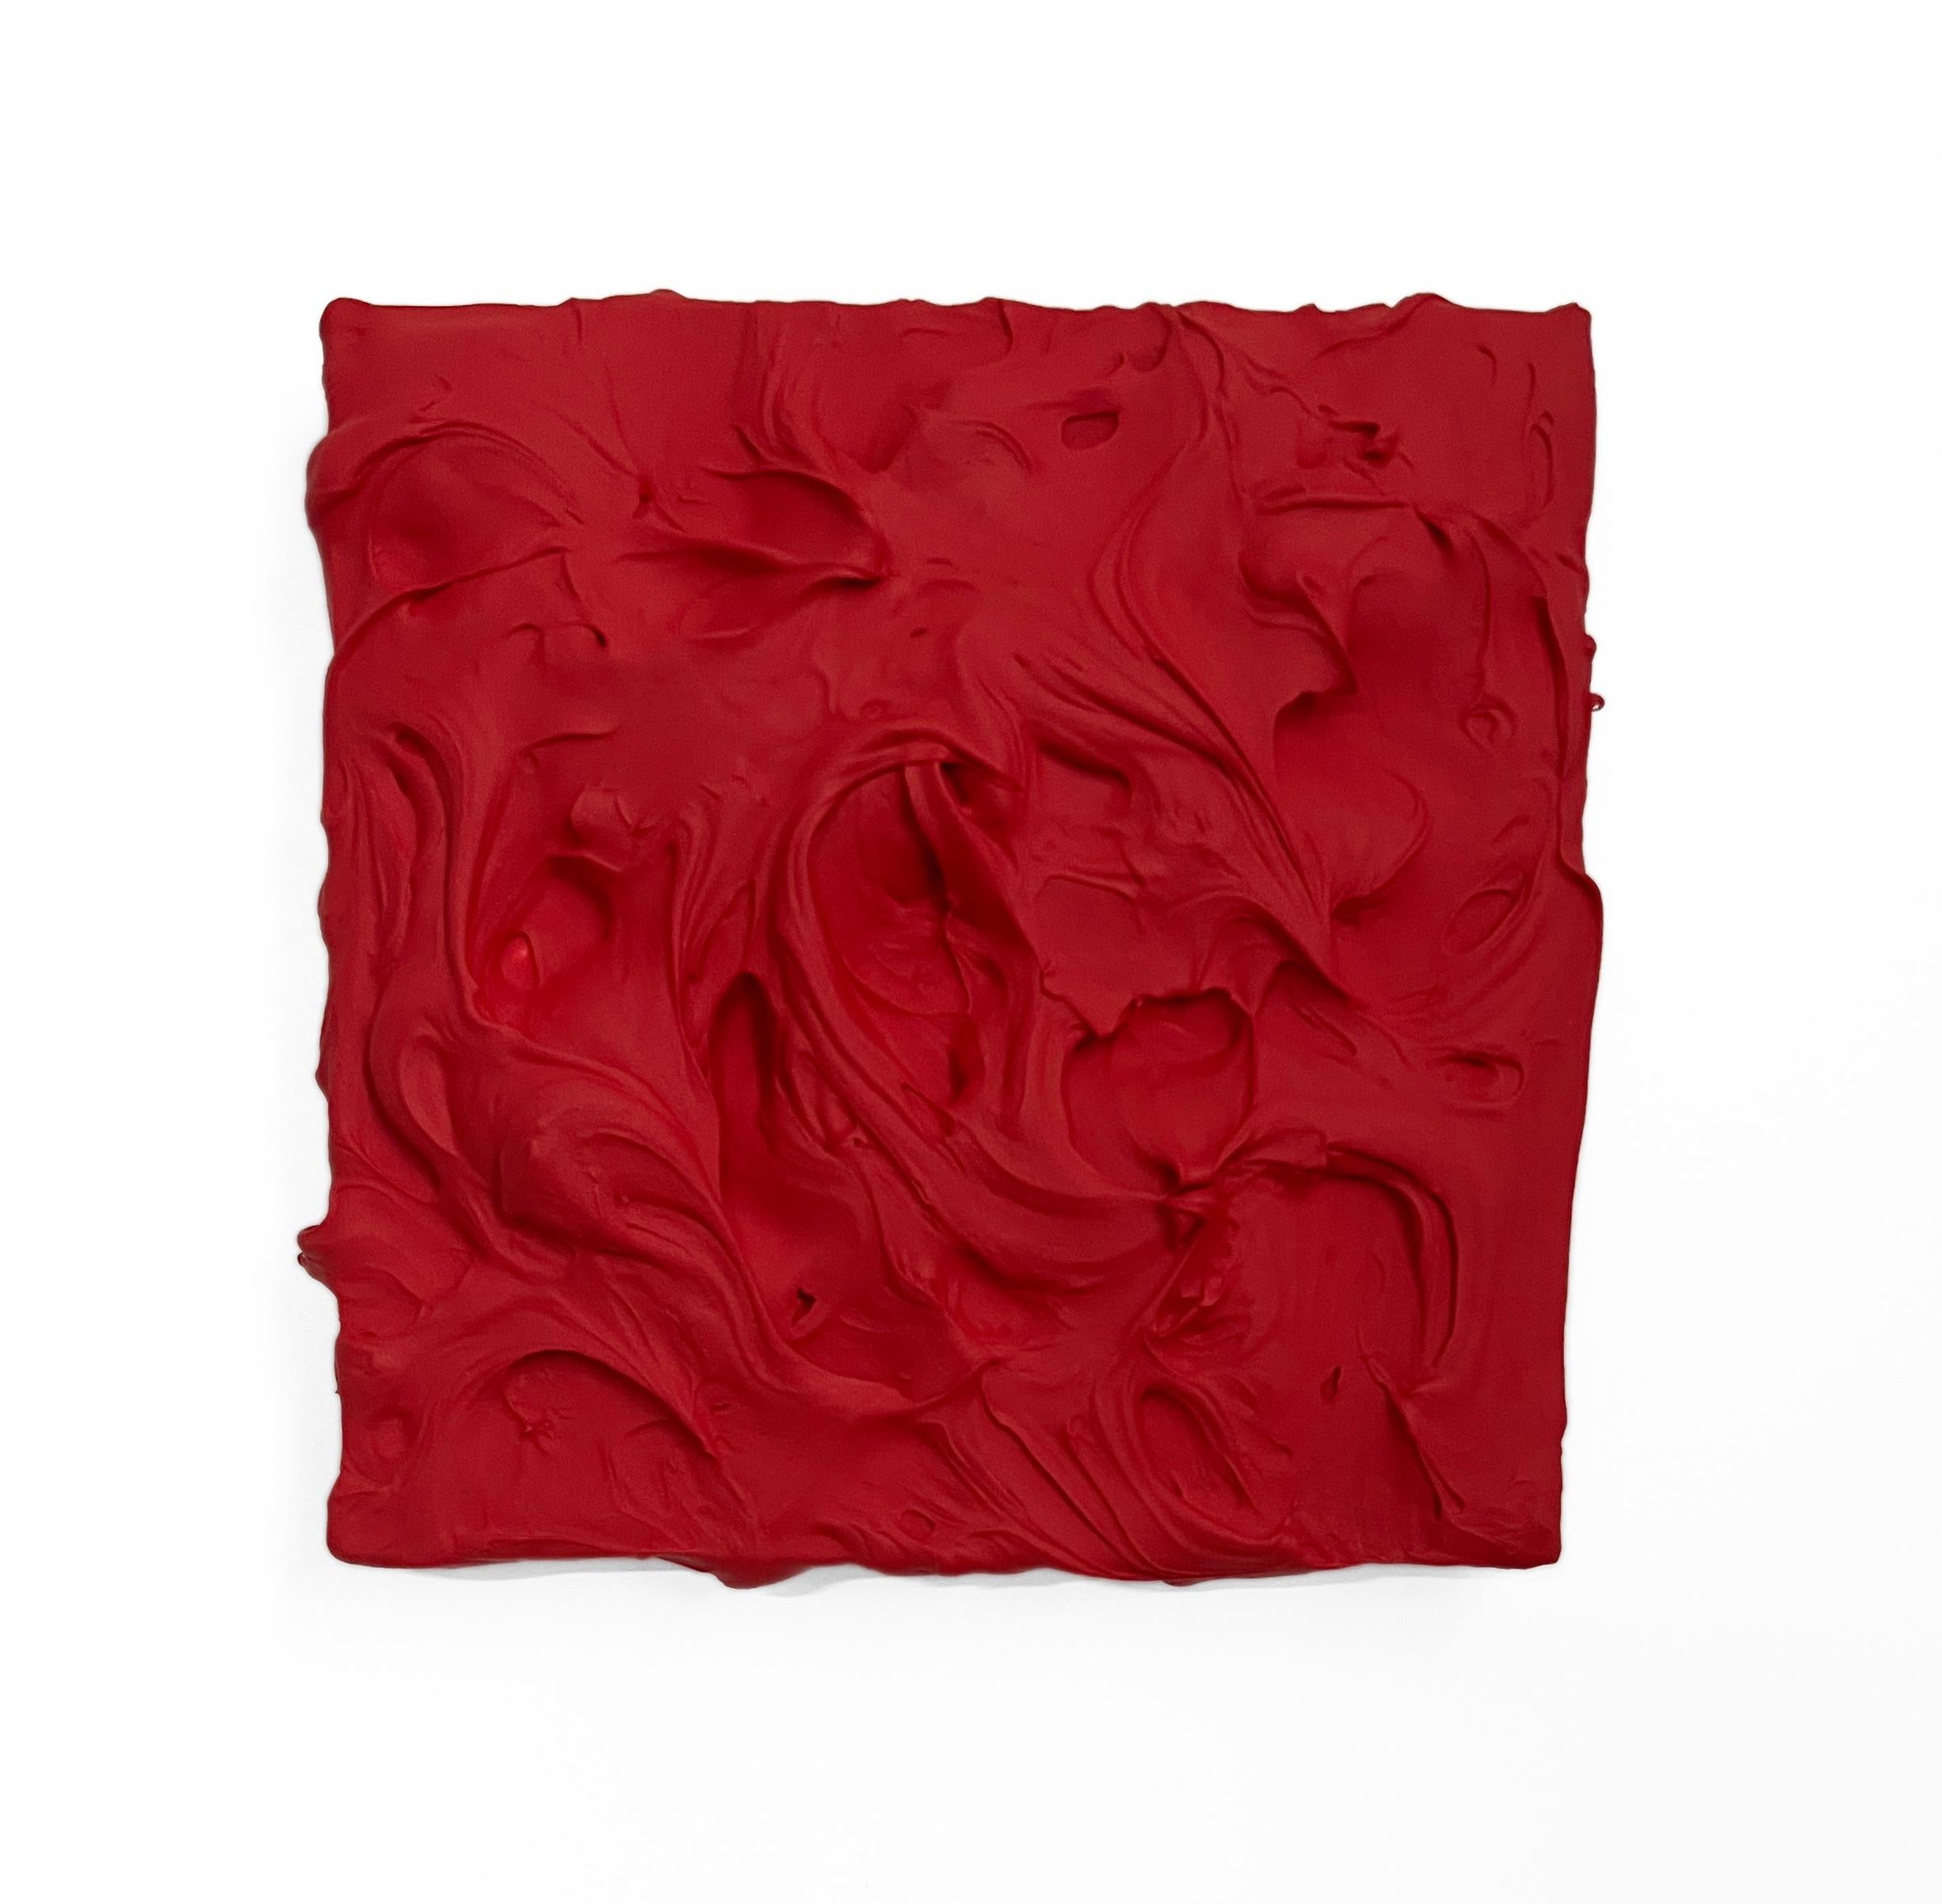 Chloe Hedden Abstract Painting - Red Excess (thick impasto painting monochrome pop art square design)